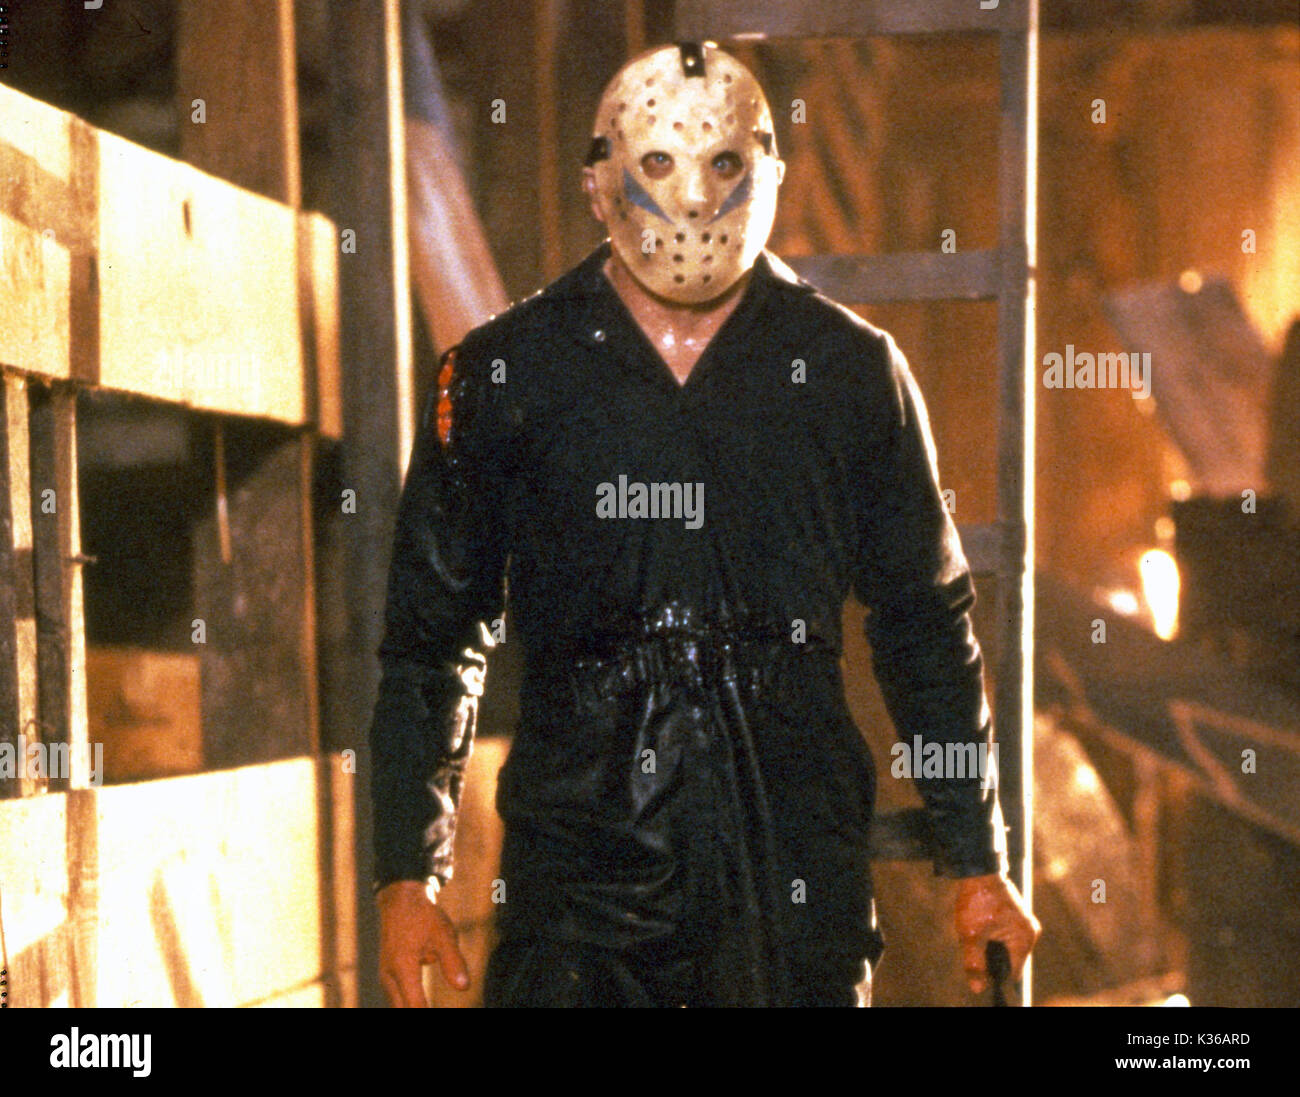 Friday the 13th: A New Beginning Also Known As: Friday the 13th Part V: A New Beginning   Friday the 13th: A New Beginning Also Known As: Friday the 13th Part V: A New Beginning     Date: 1985 Stock Photo